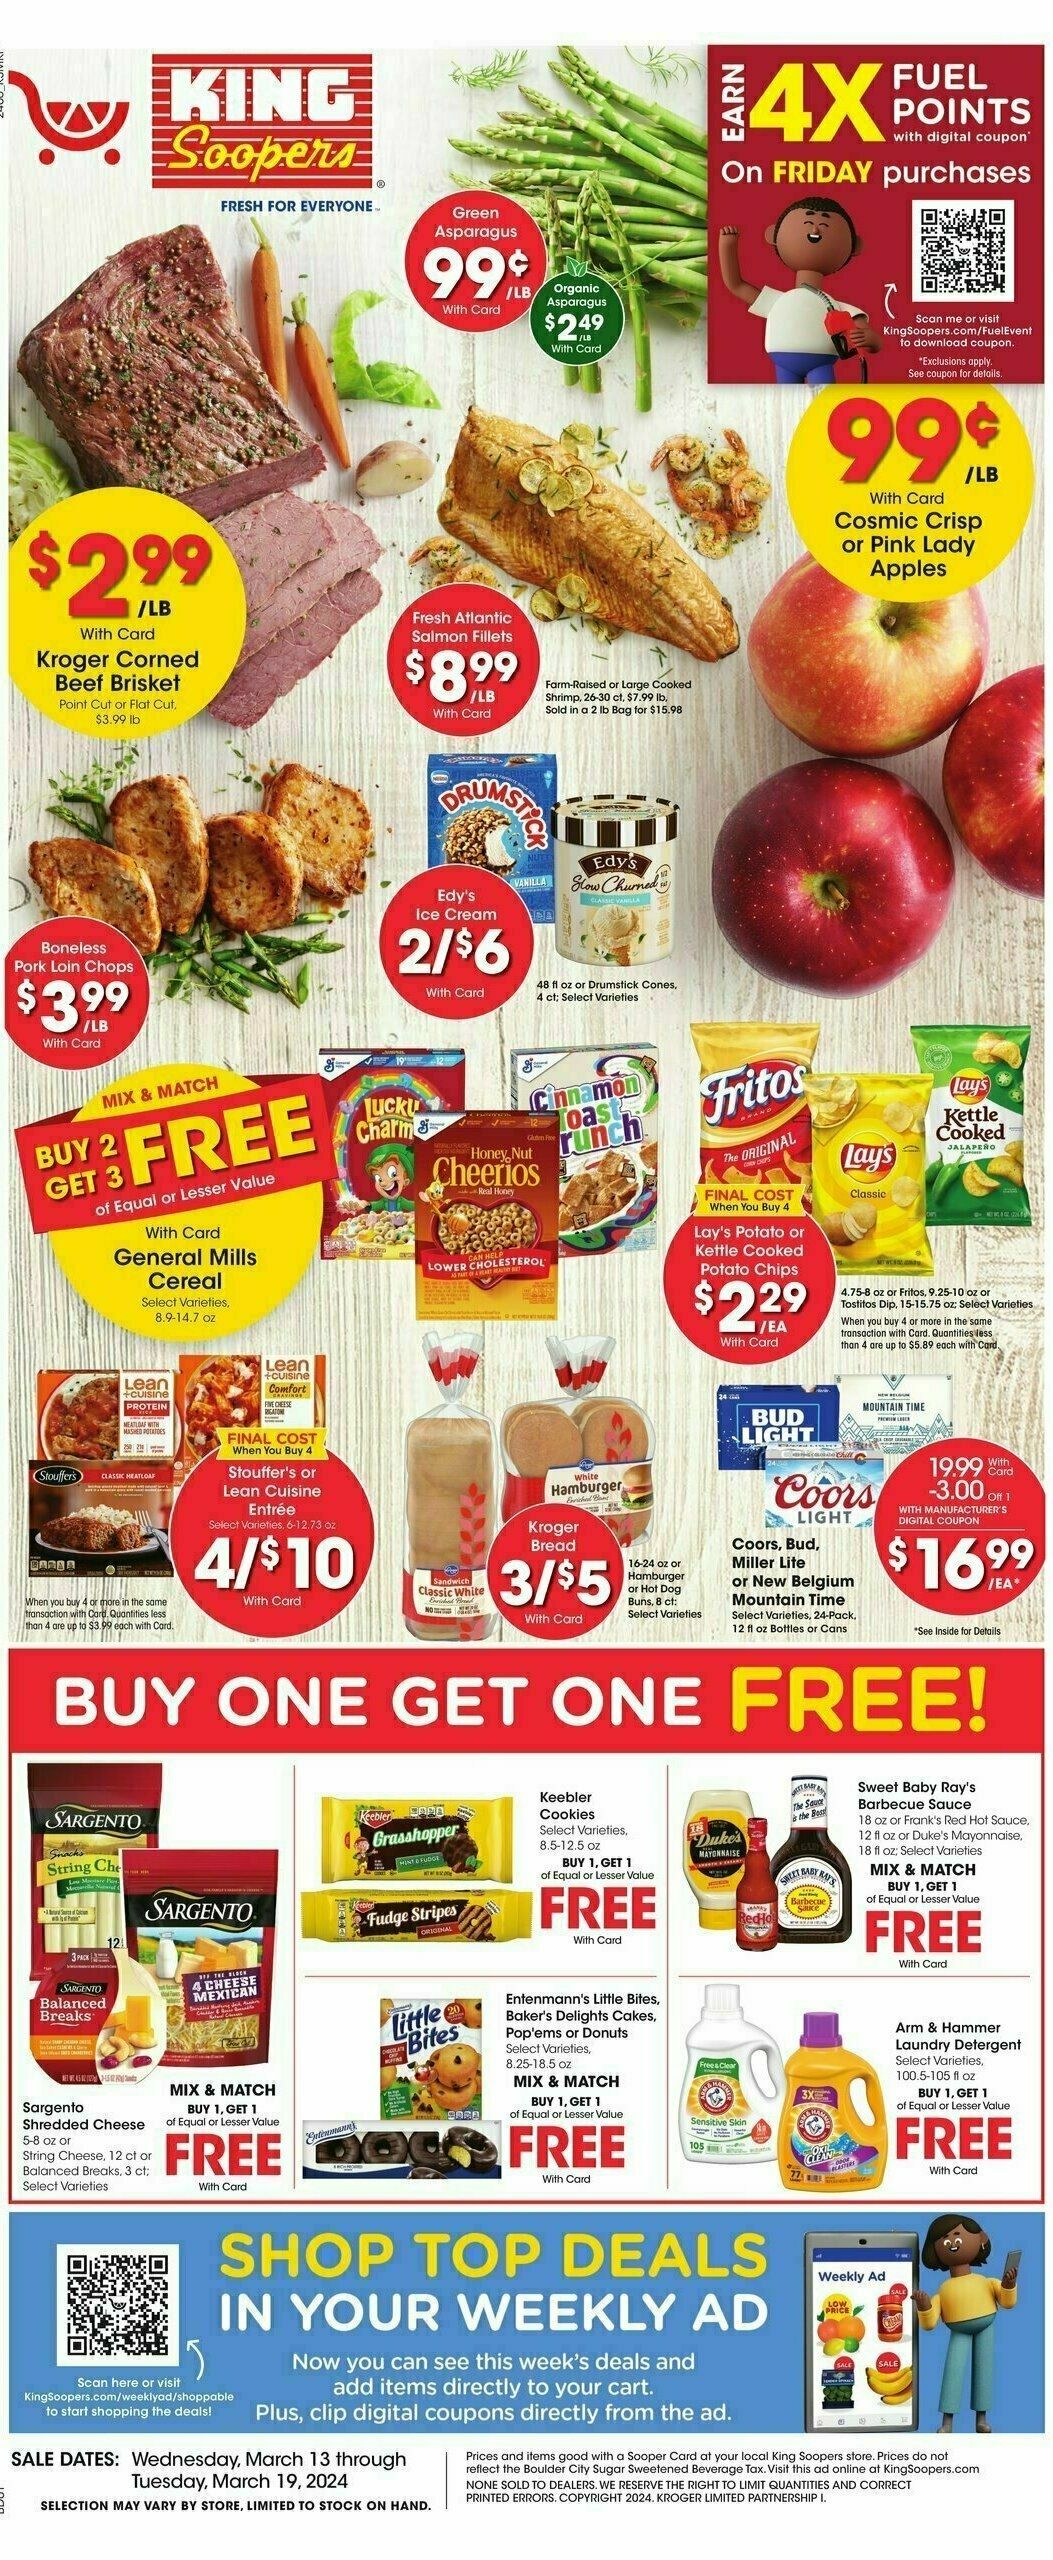 King Soopers Weekly Ad from March 13